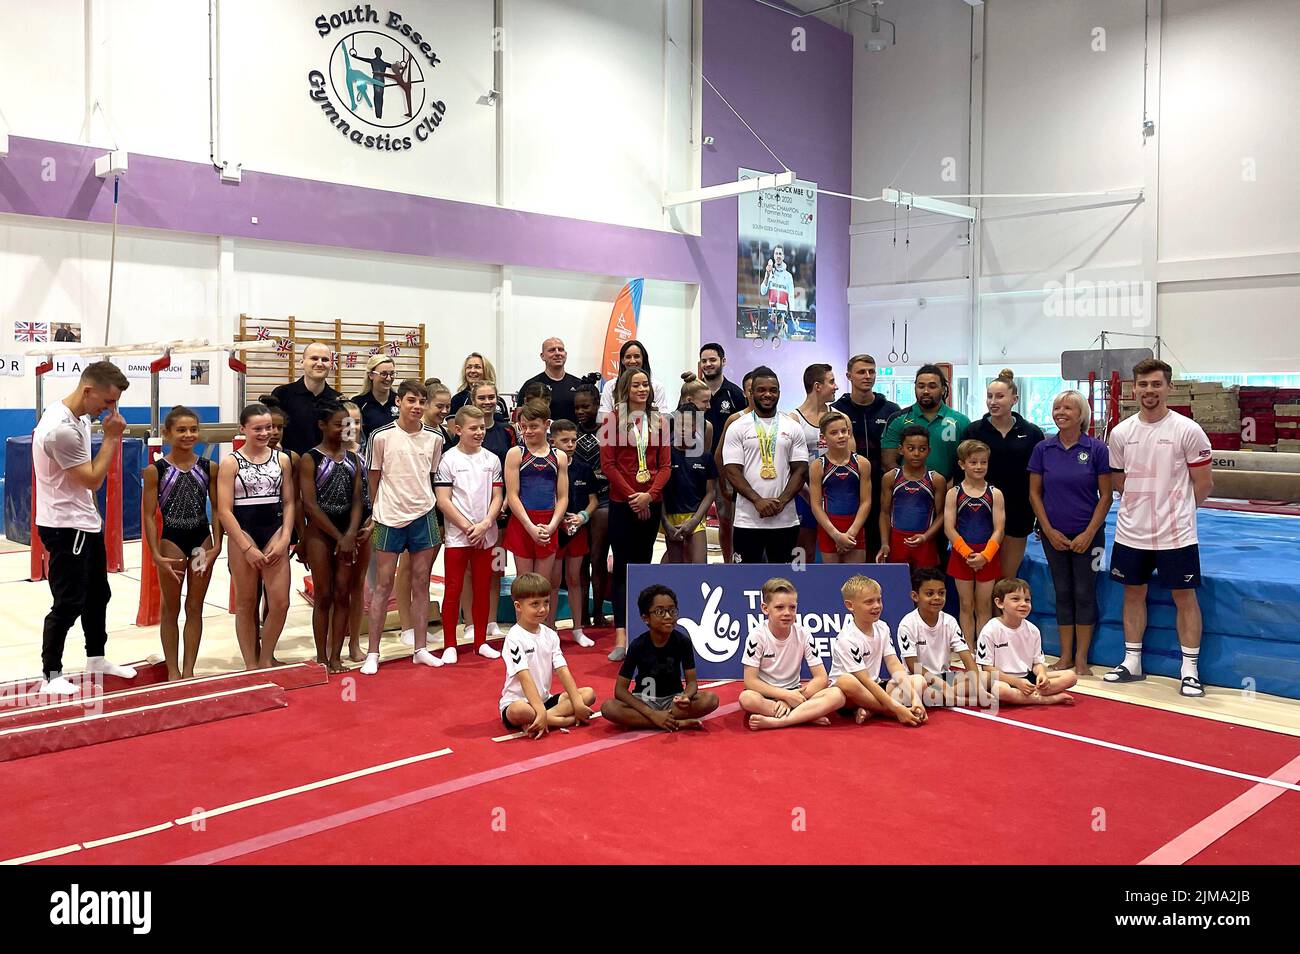 Max Whitlock (left), Georgia-Mae Fenton (centre) and Courtney Tulloch poses for photographers at the South Essex Gymnastics Club, Essex. Picture date: Friday August 5, 2022. Max Whitlock, Courtney Tulloch and Georgia-Mae Fenton surprised a room full of young children who have been supporting Team England throughout the Games. Stock Photo